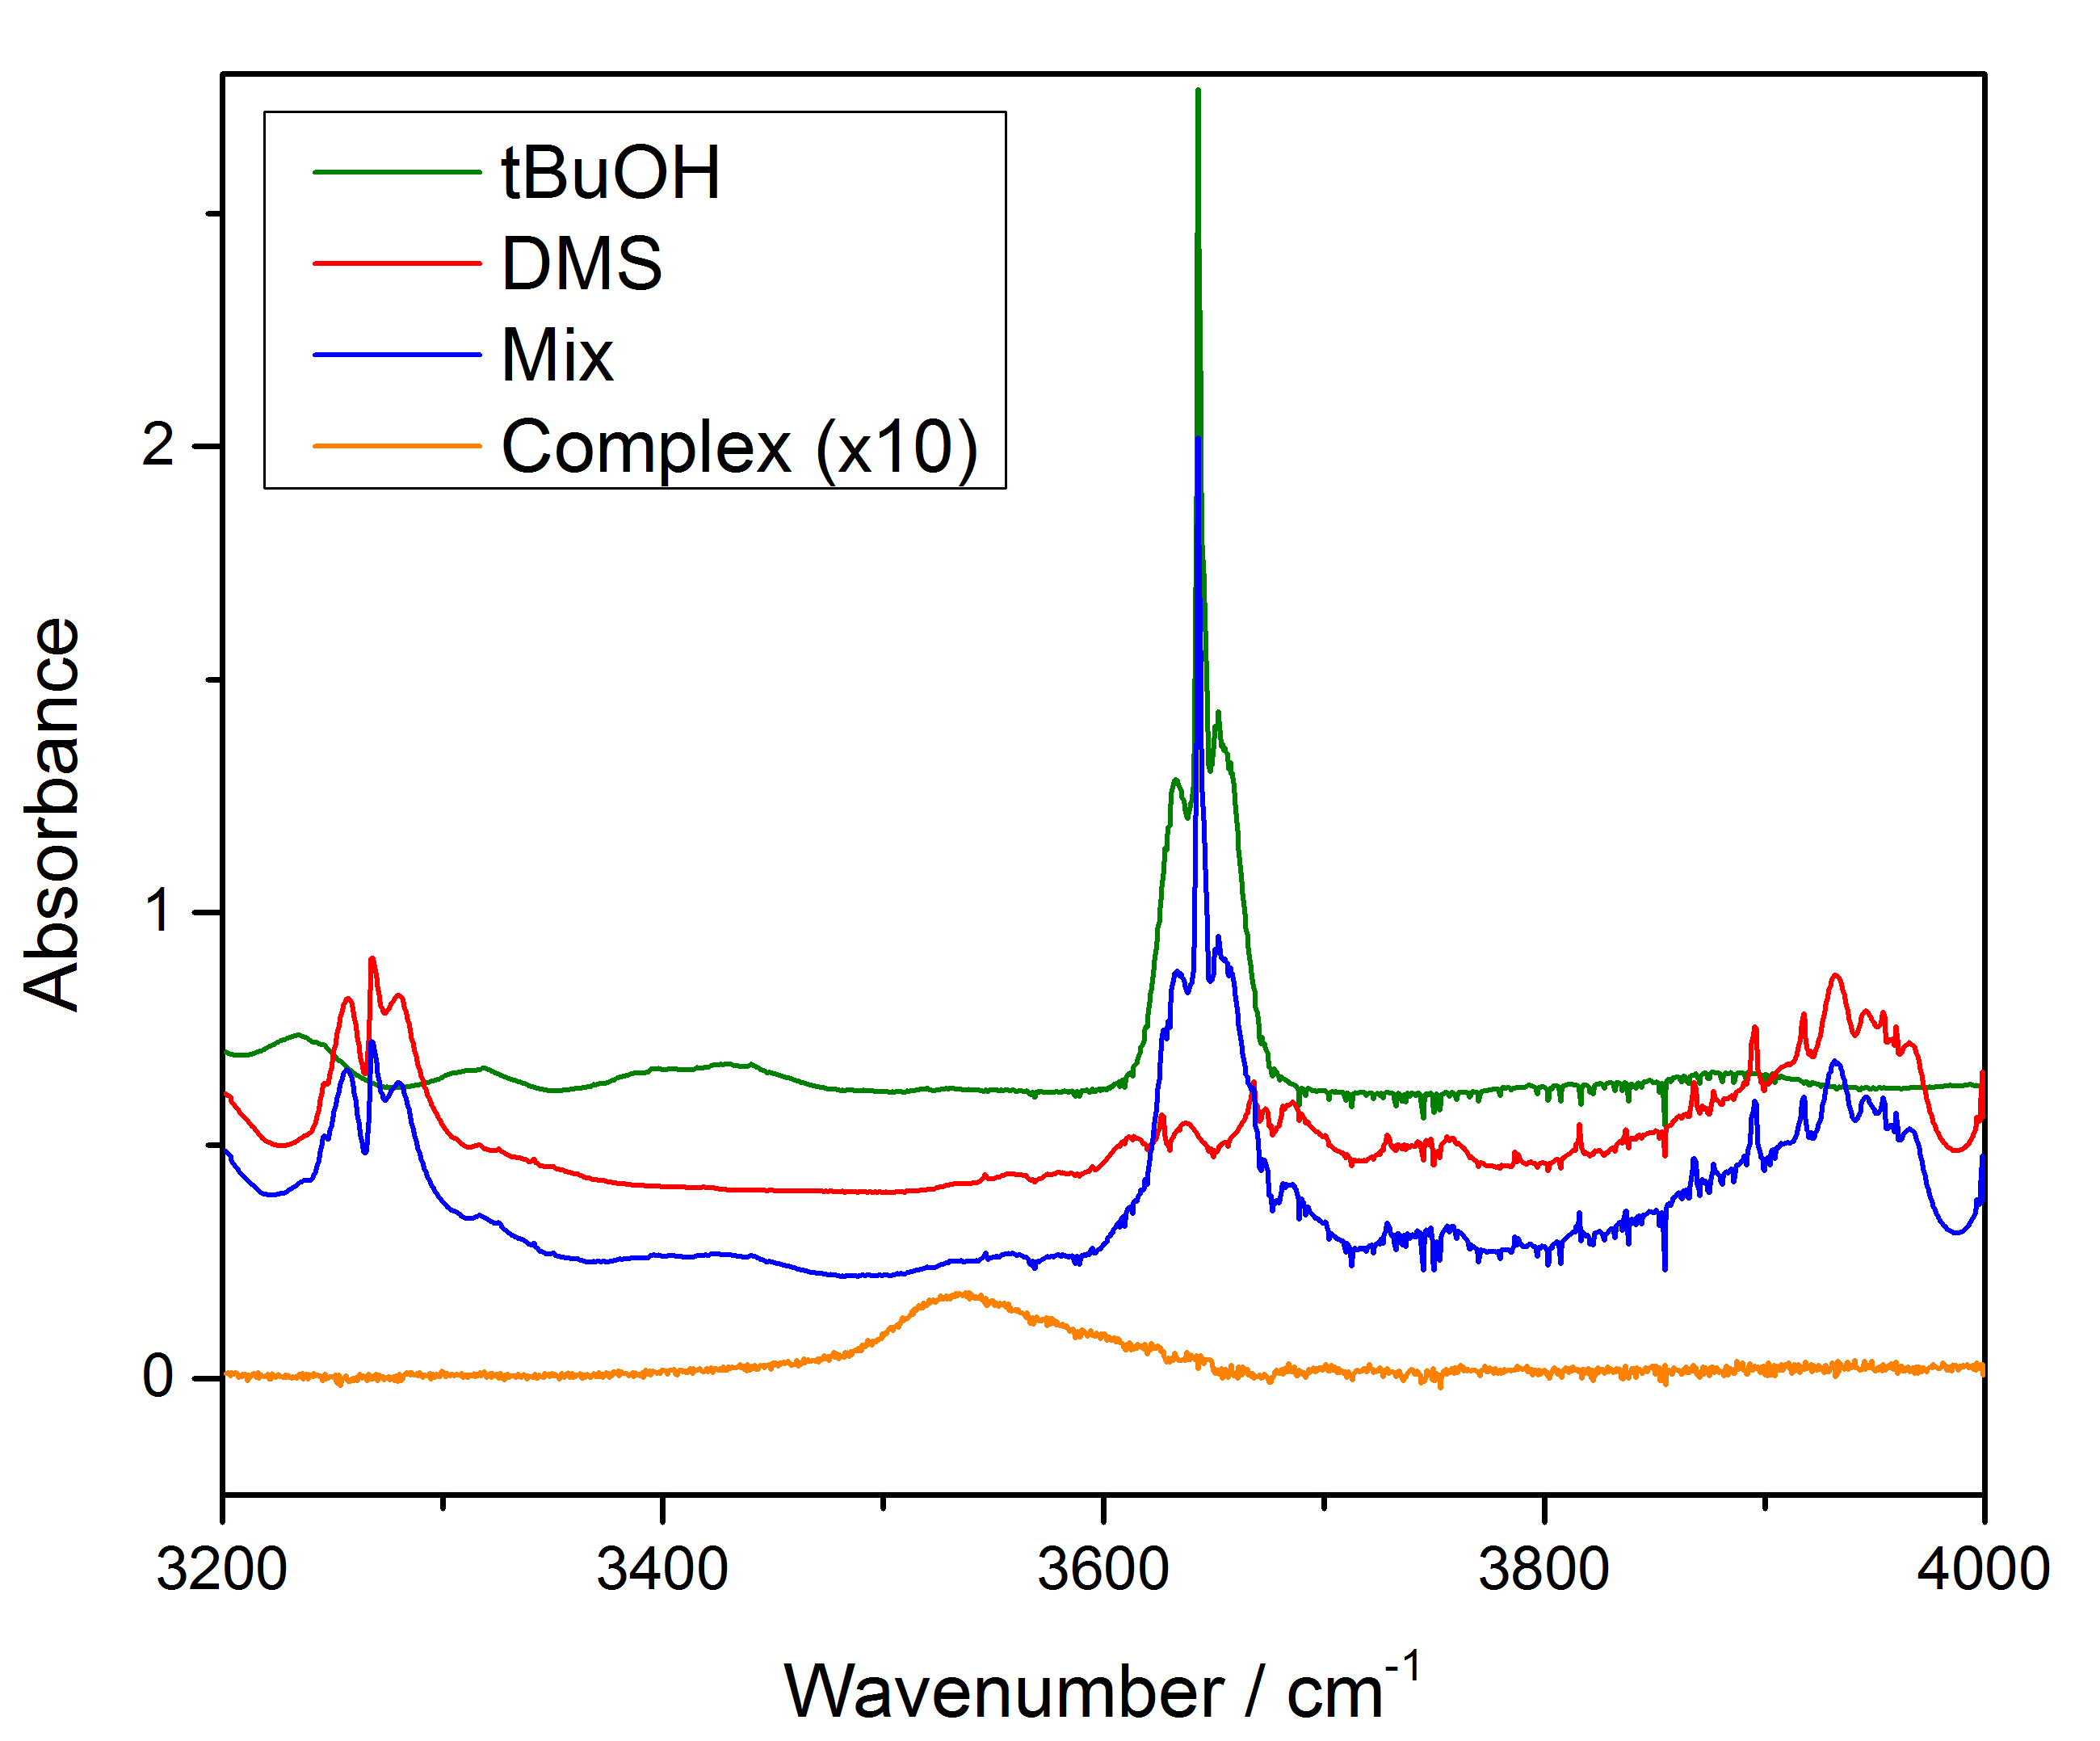 The complex of t-butanol (tBuOH) and dimethylsulfide (DMS) is detected by subtracting the monomer spectra (green and red) from a mixture spectrum (blue), resulting in a spectrum of the complex (orange